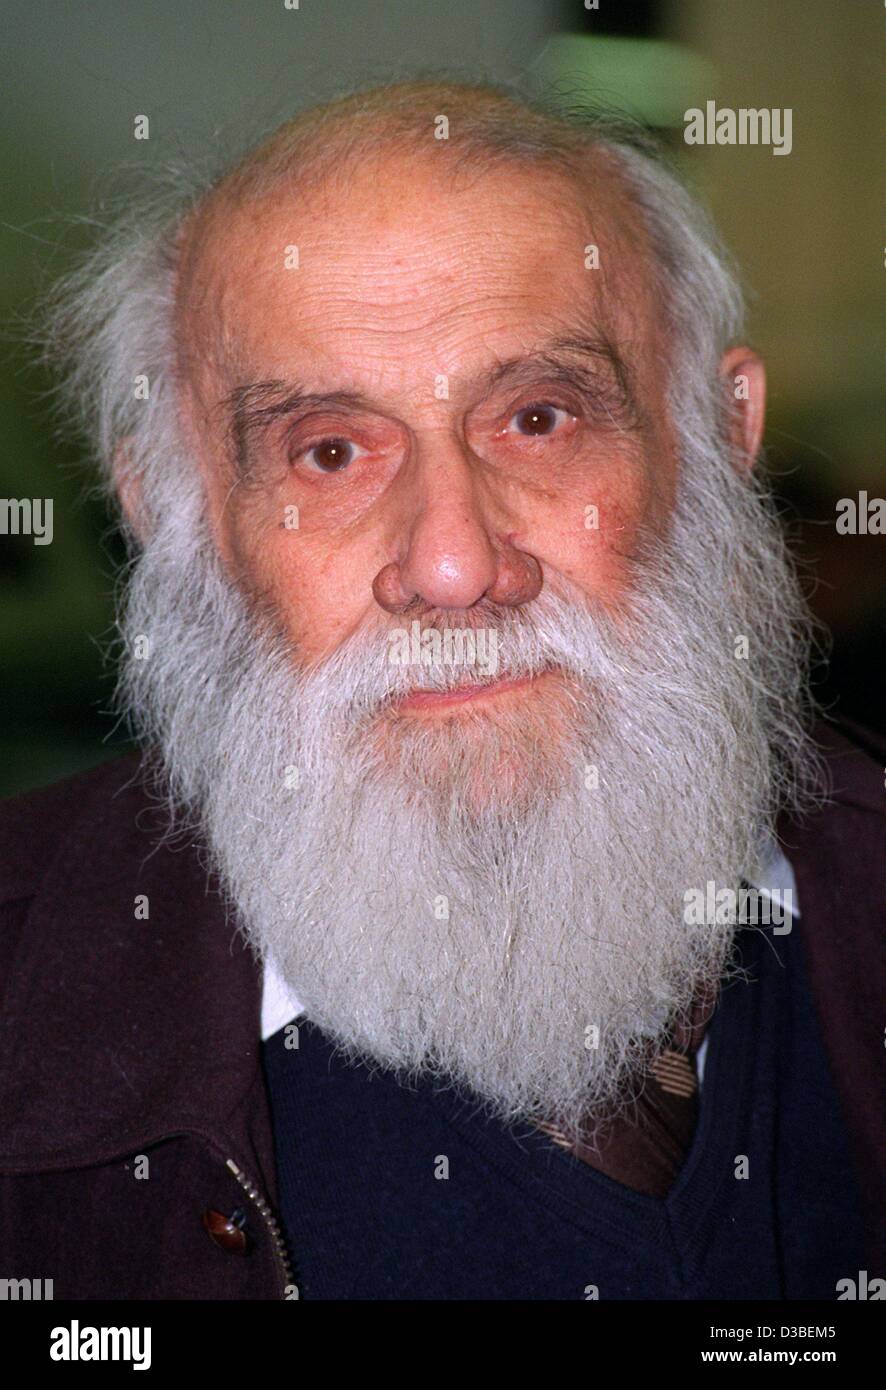 (dpa files) - Russian author and civil rights activist Lev Kopelev pictured in Frankfurt, 4 October 1996. The dissident author was expatriated from the former Soviet Union in 1981 and has since lived in West Germany. Even after his rehabilitation in 1990 Kopelev decided to stay in Germany for profes Stock Photo